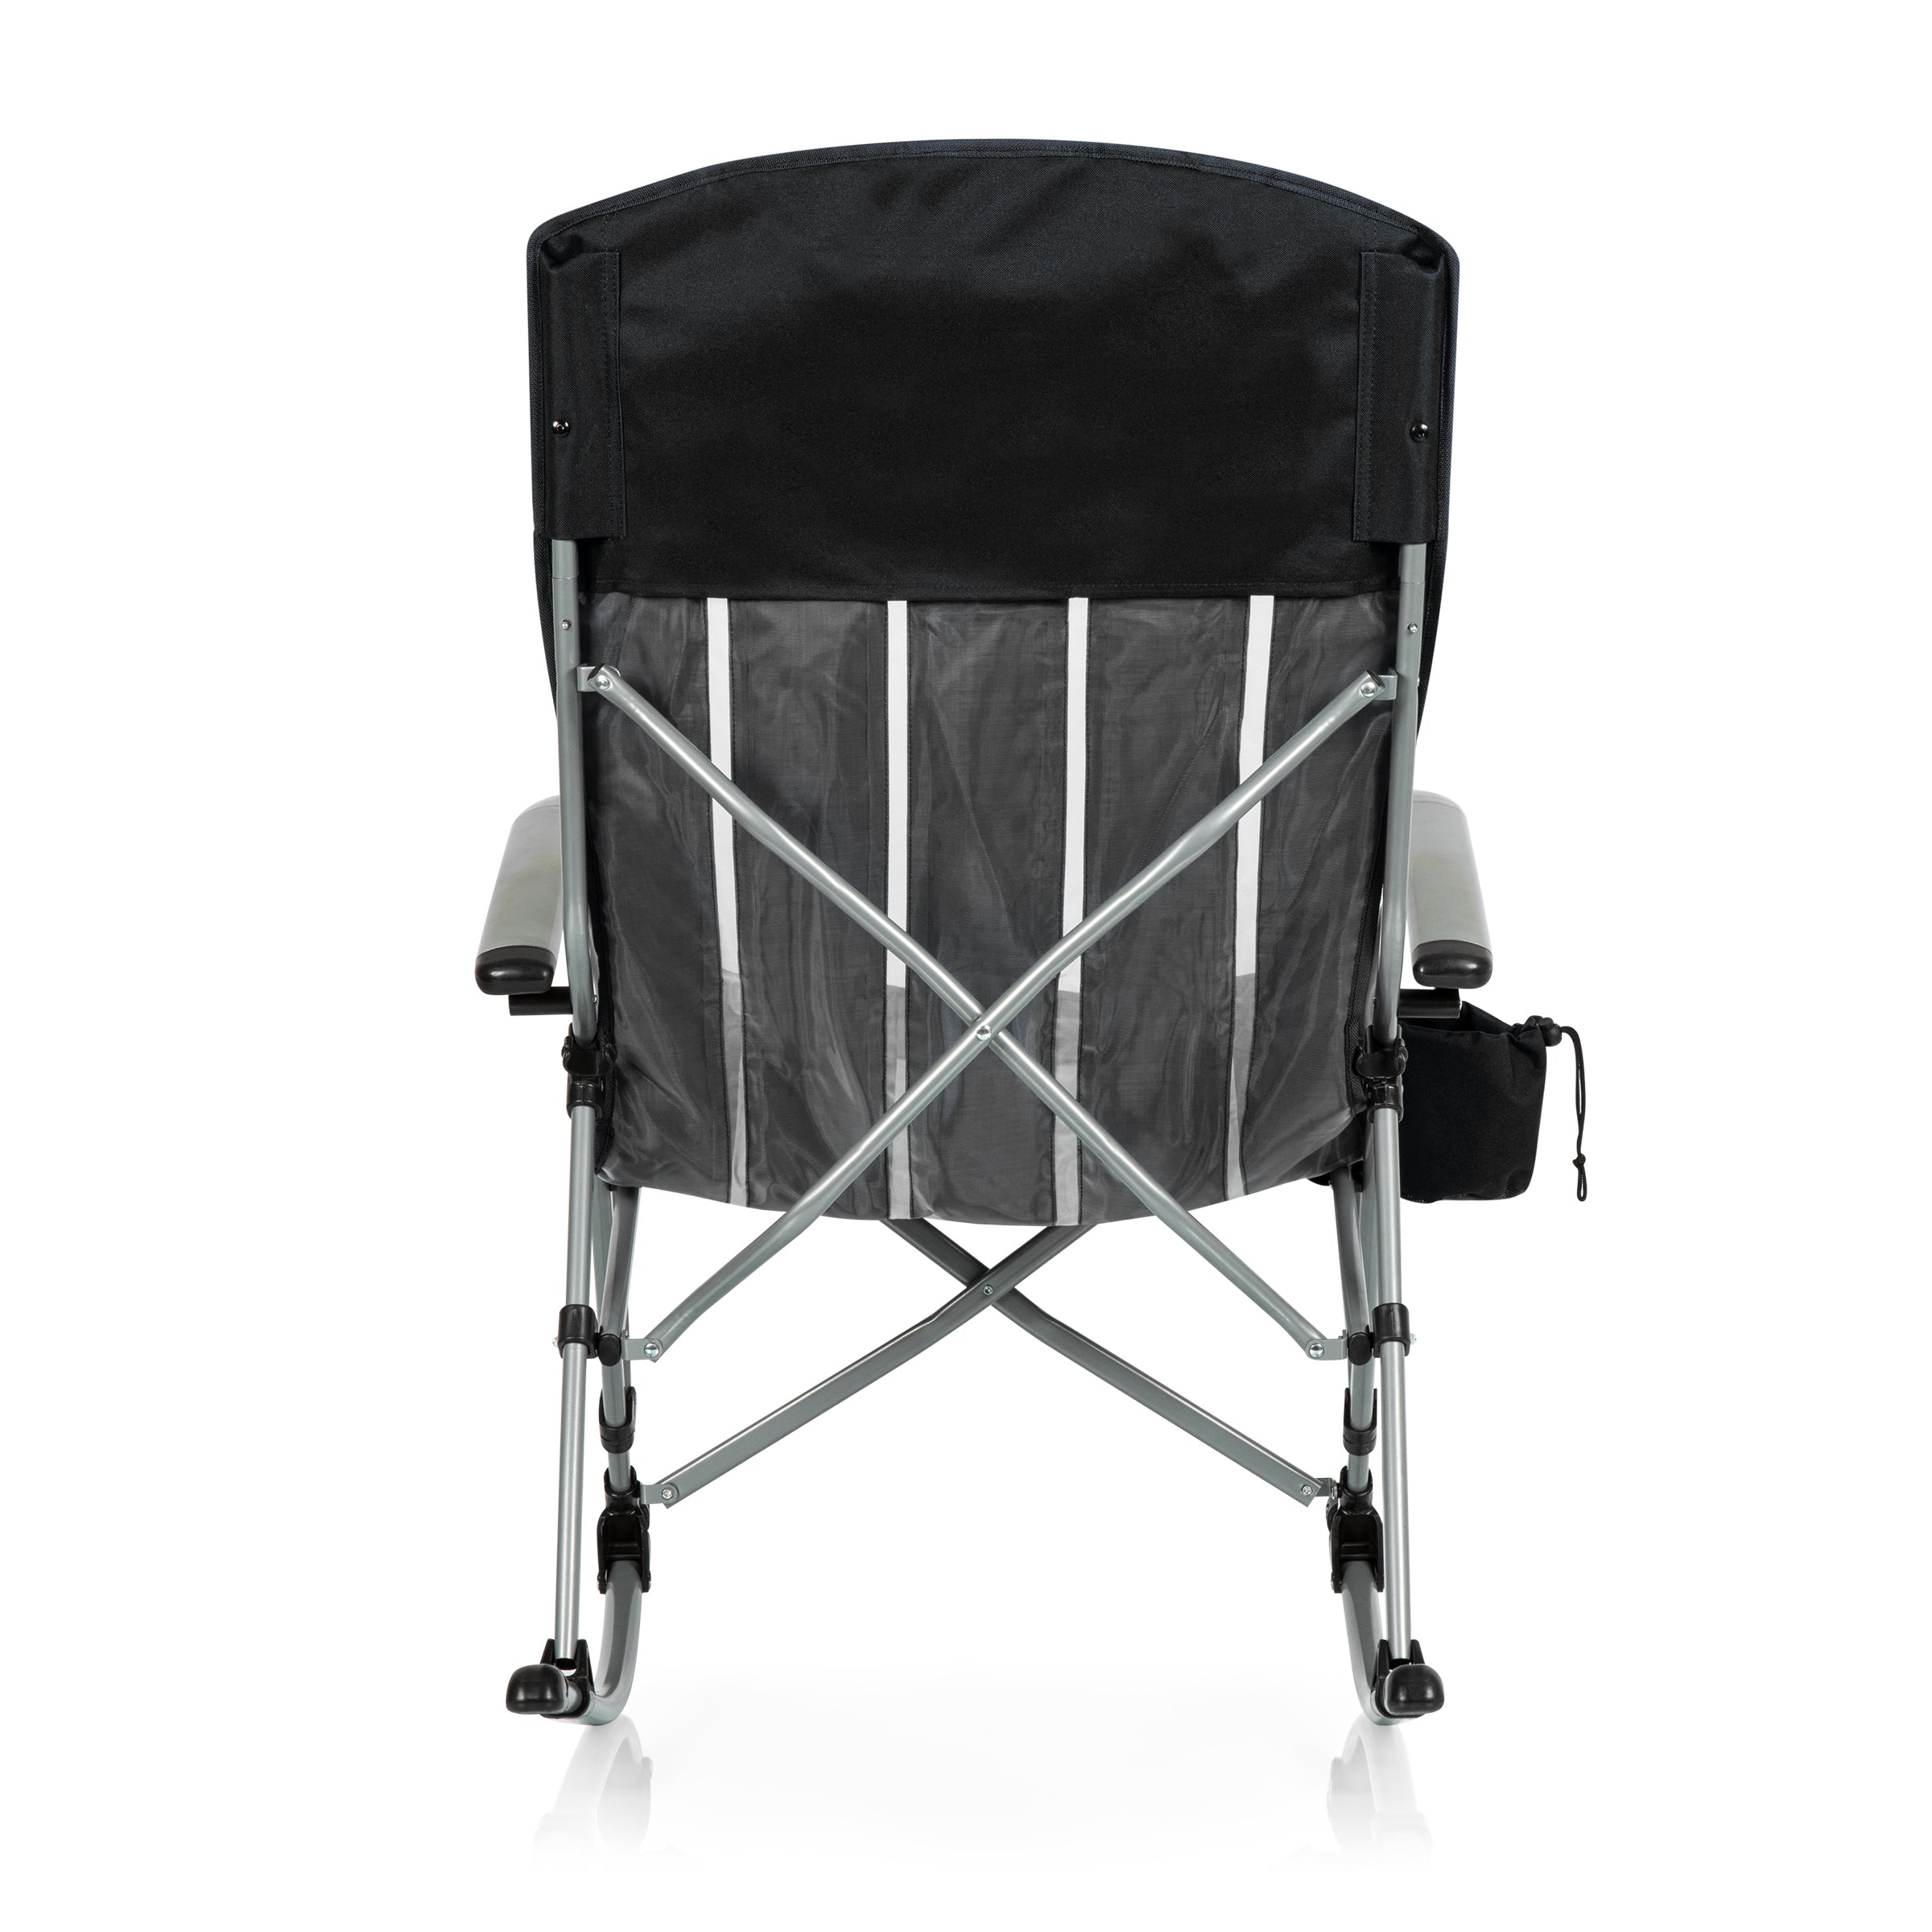 LSU Tigers - Outdoor Rocking Camp Chair